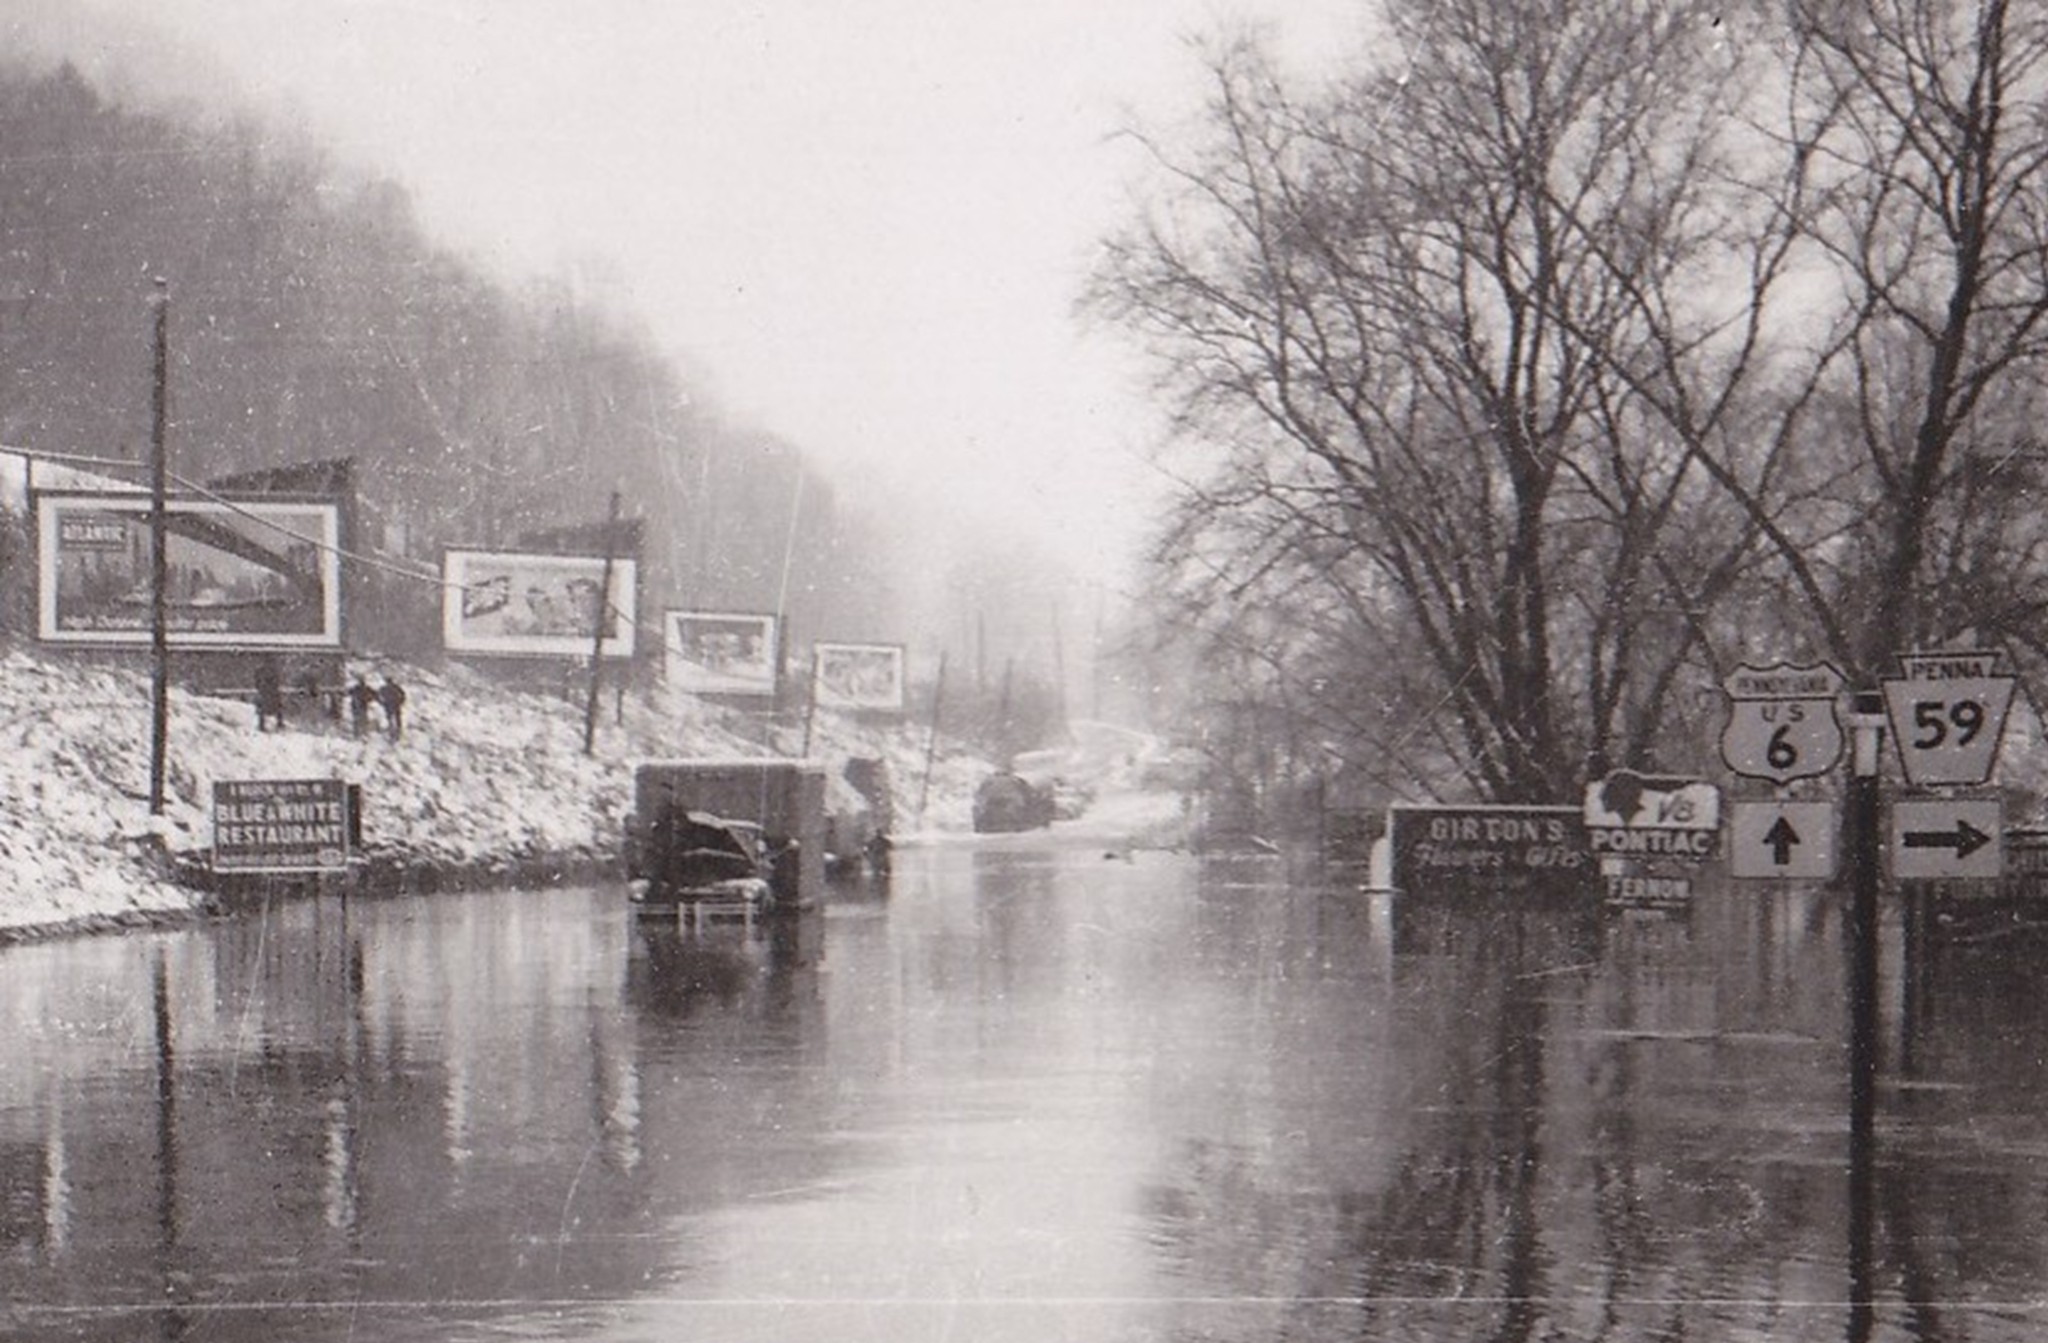 1956 flood, US Route 6 at Rogertown just east of Warren, PA